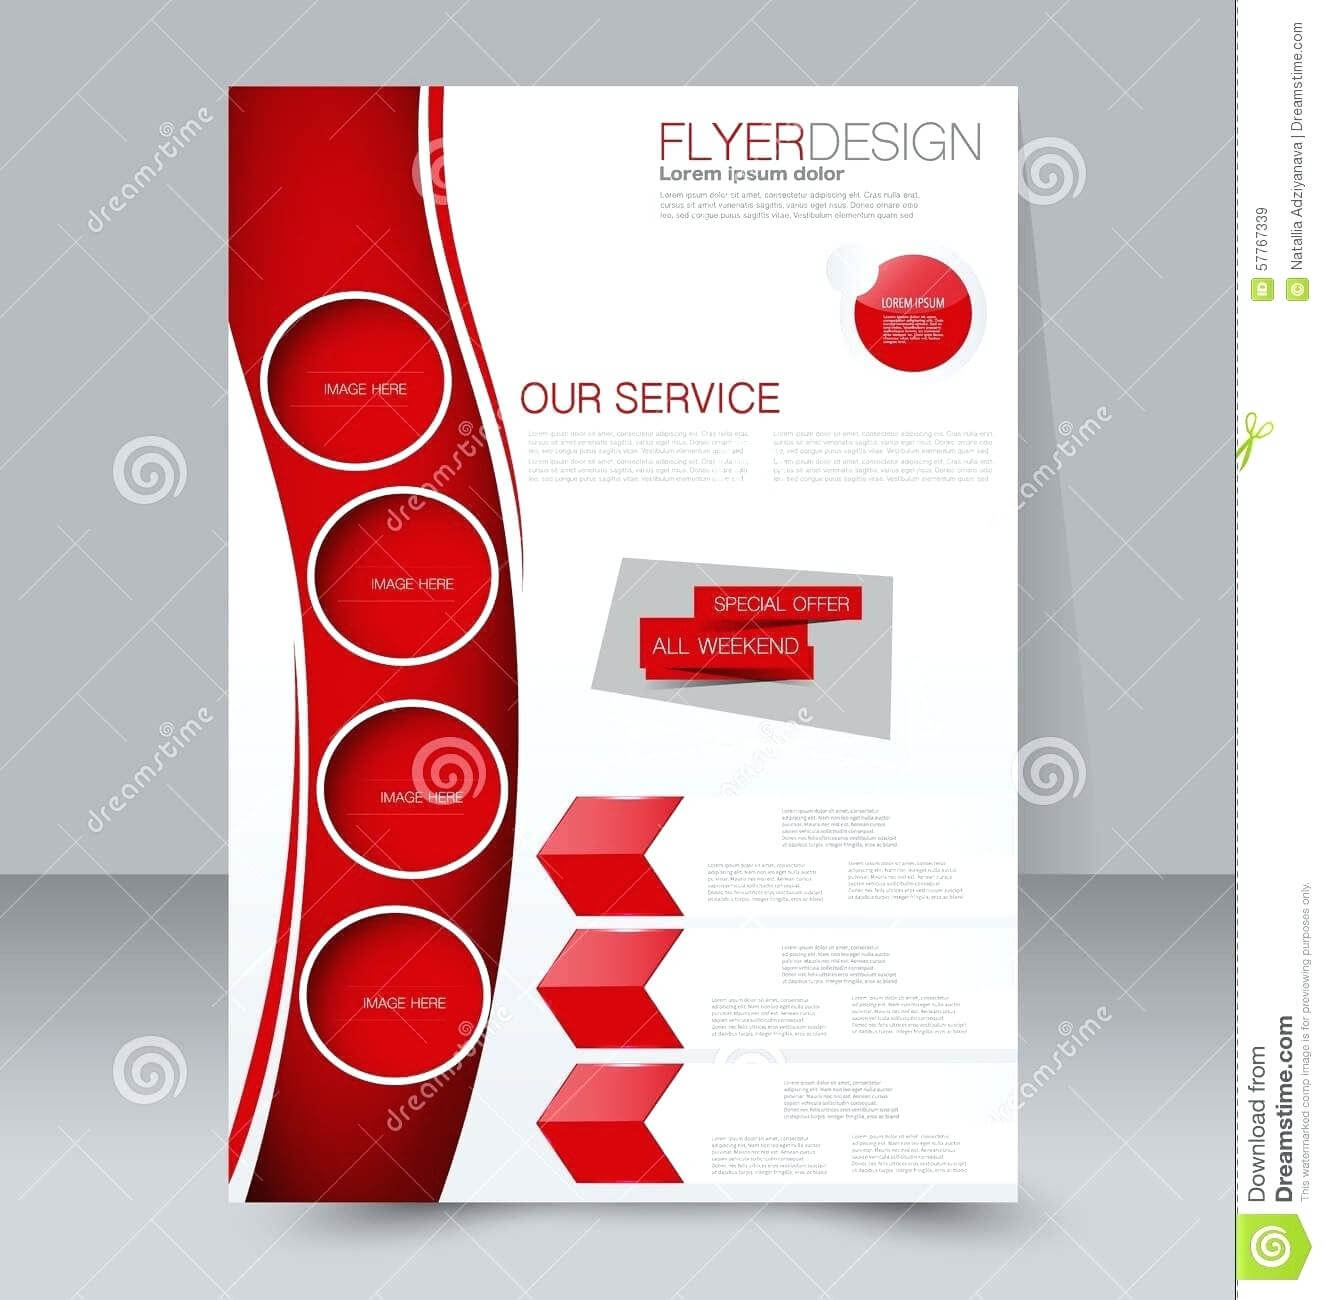 Brochure Templates Free Download – Goodwincolor.co Inside Creative Brochure Templates Free Download